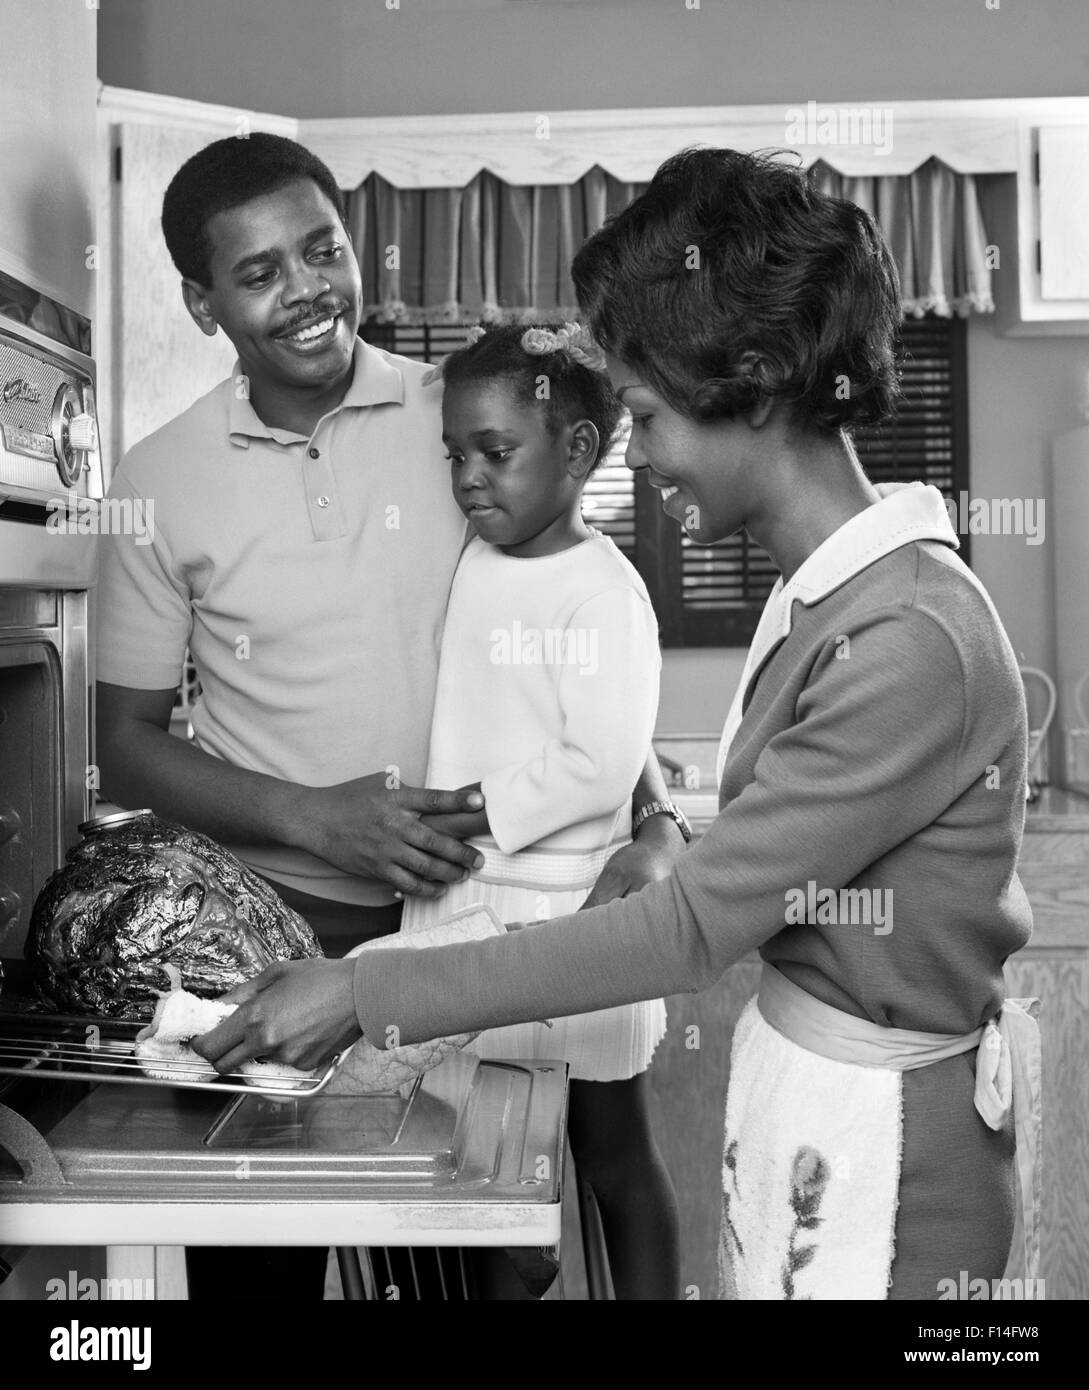 1960s AFRICAN AMERICAN FAMILY IN KITCHEN FATHER AND DAUGHTER WATCHING MOTHER REMOVE ROAST TURKEY FROM OVEN Stock Photo